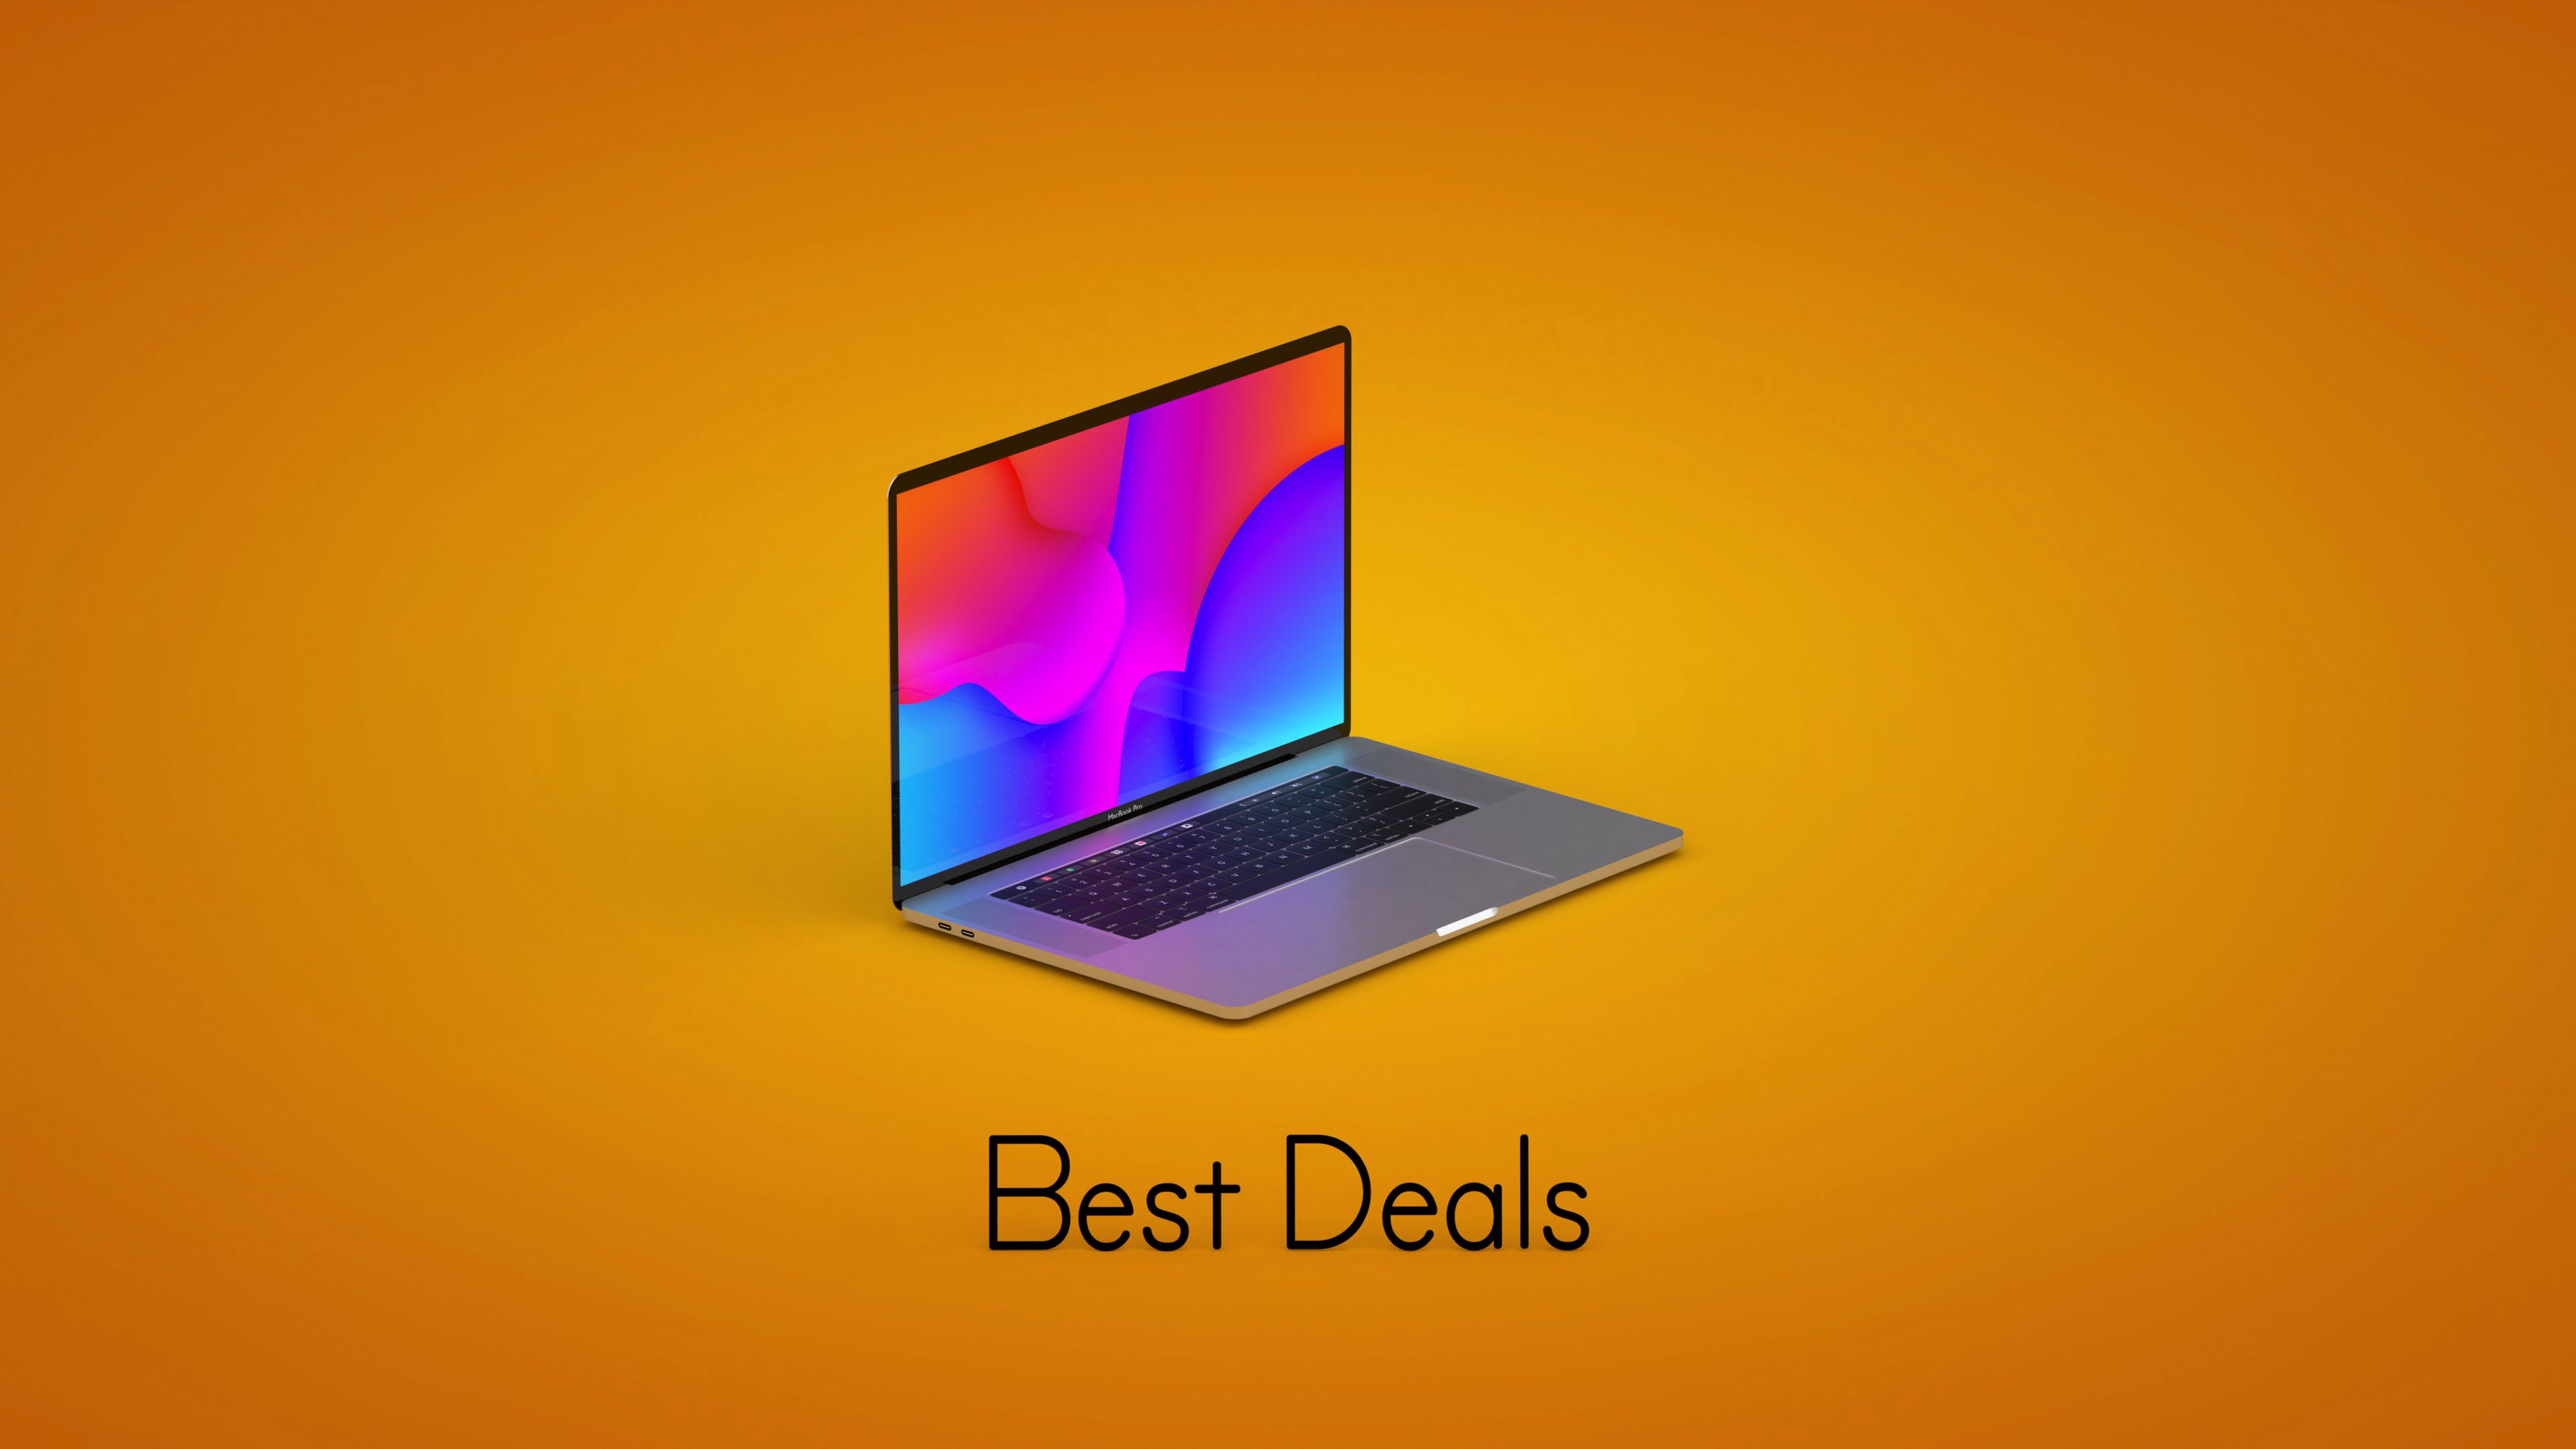 MacBook Air: Should You Buy? Reviews, Features, Deals and More